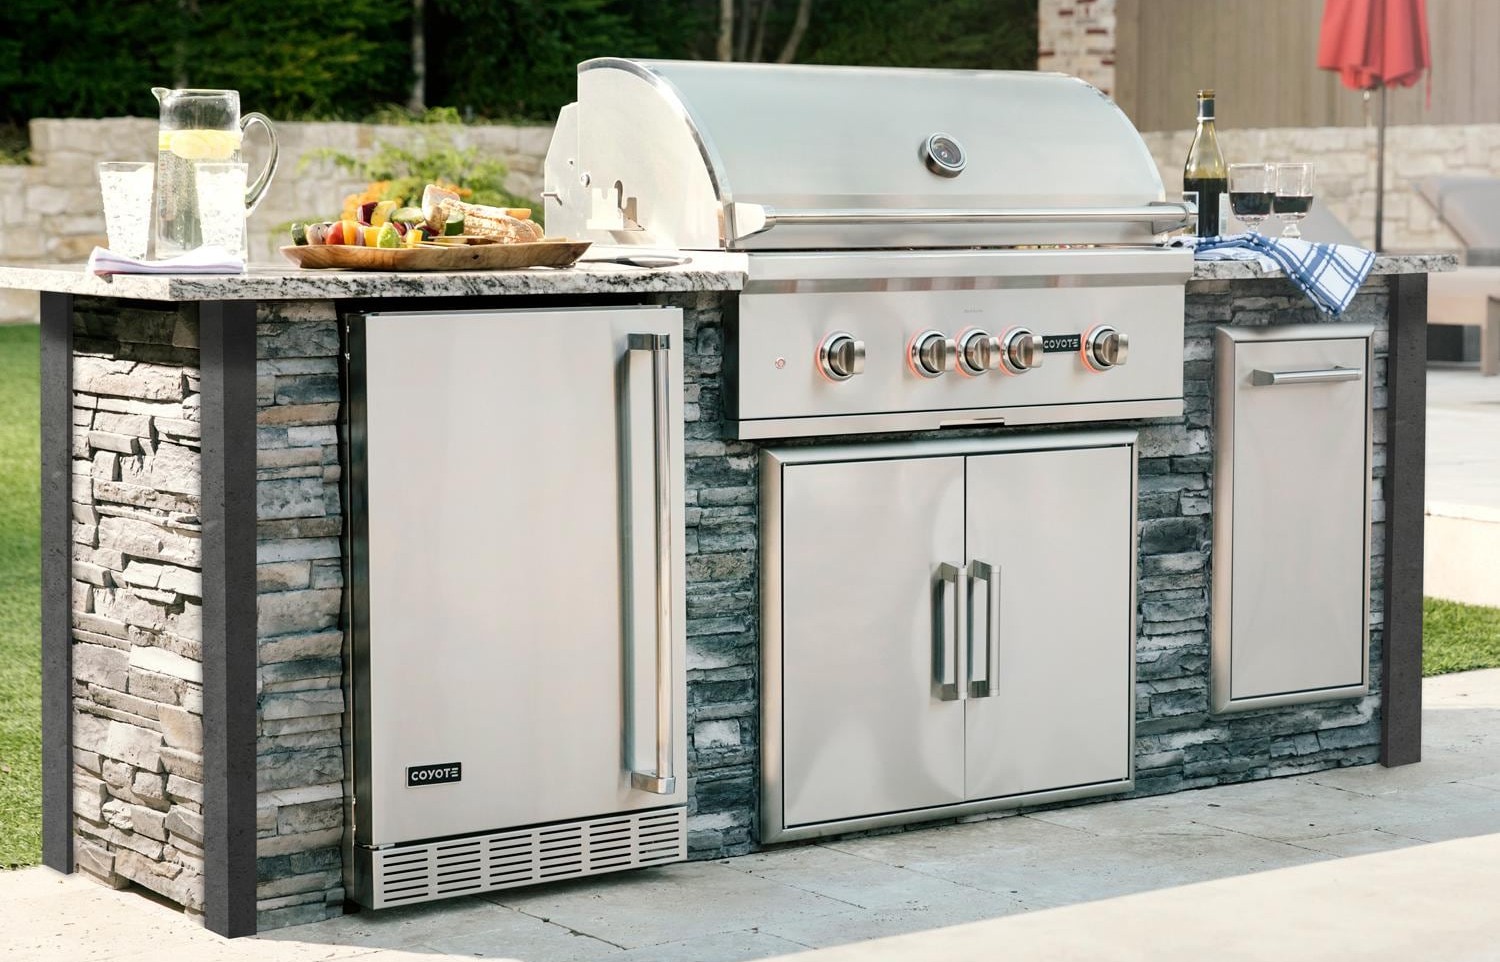 Complete Your Dream Outdoor Kitchen: Start With a Prefab Kit